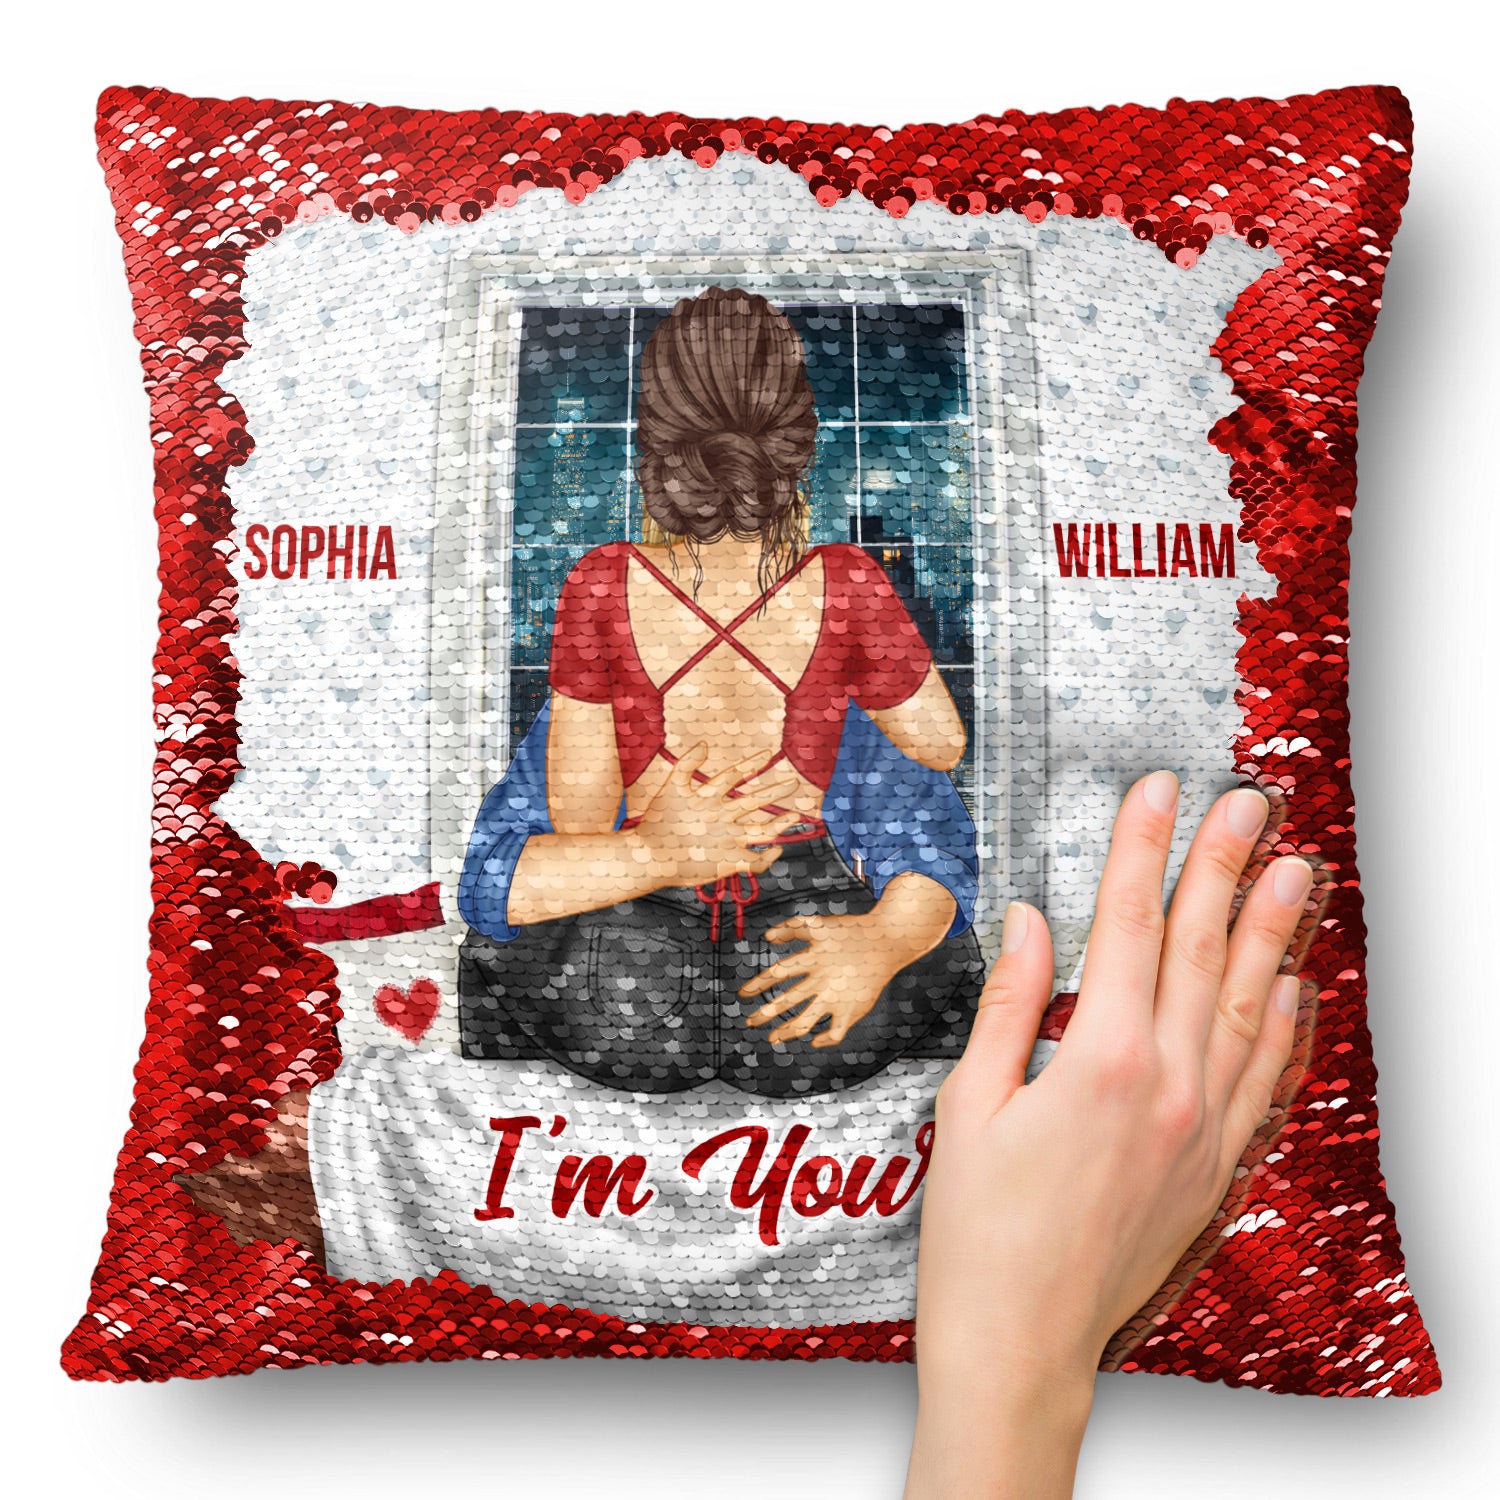 I'm Yours - Gift For Couples, Husband And Wife - Personalized Sequin Pillow, Mermaid Sequin Cushion Magic Reversible Throw Pillow